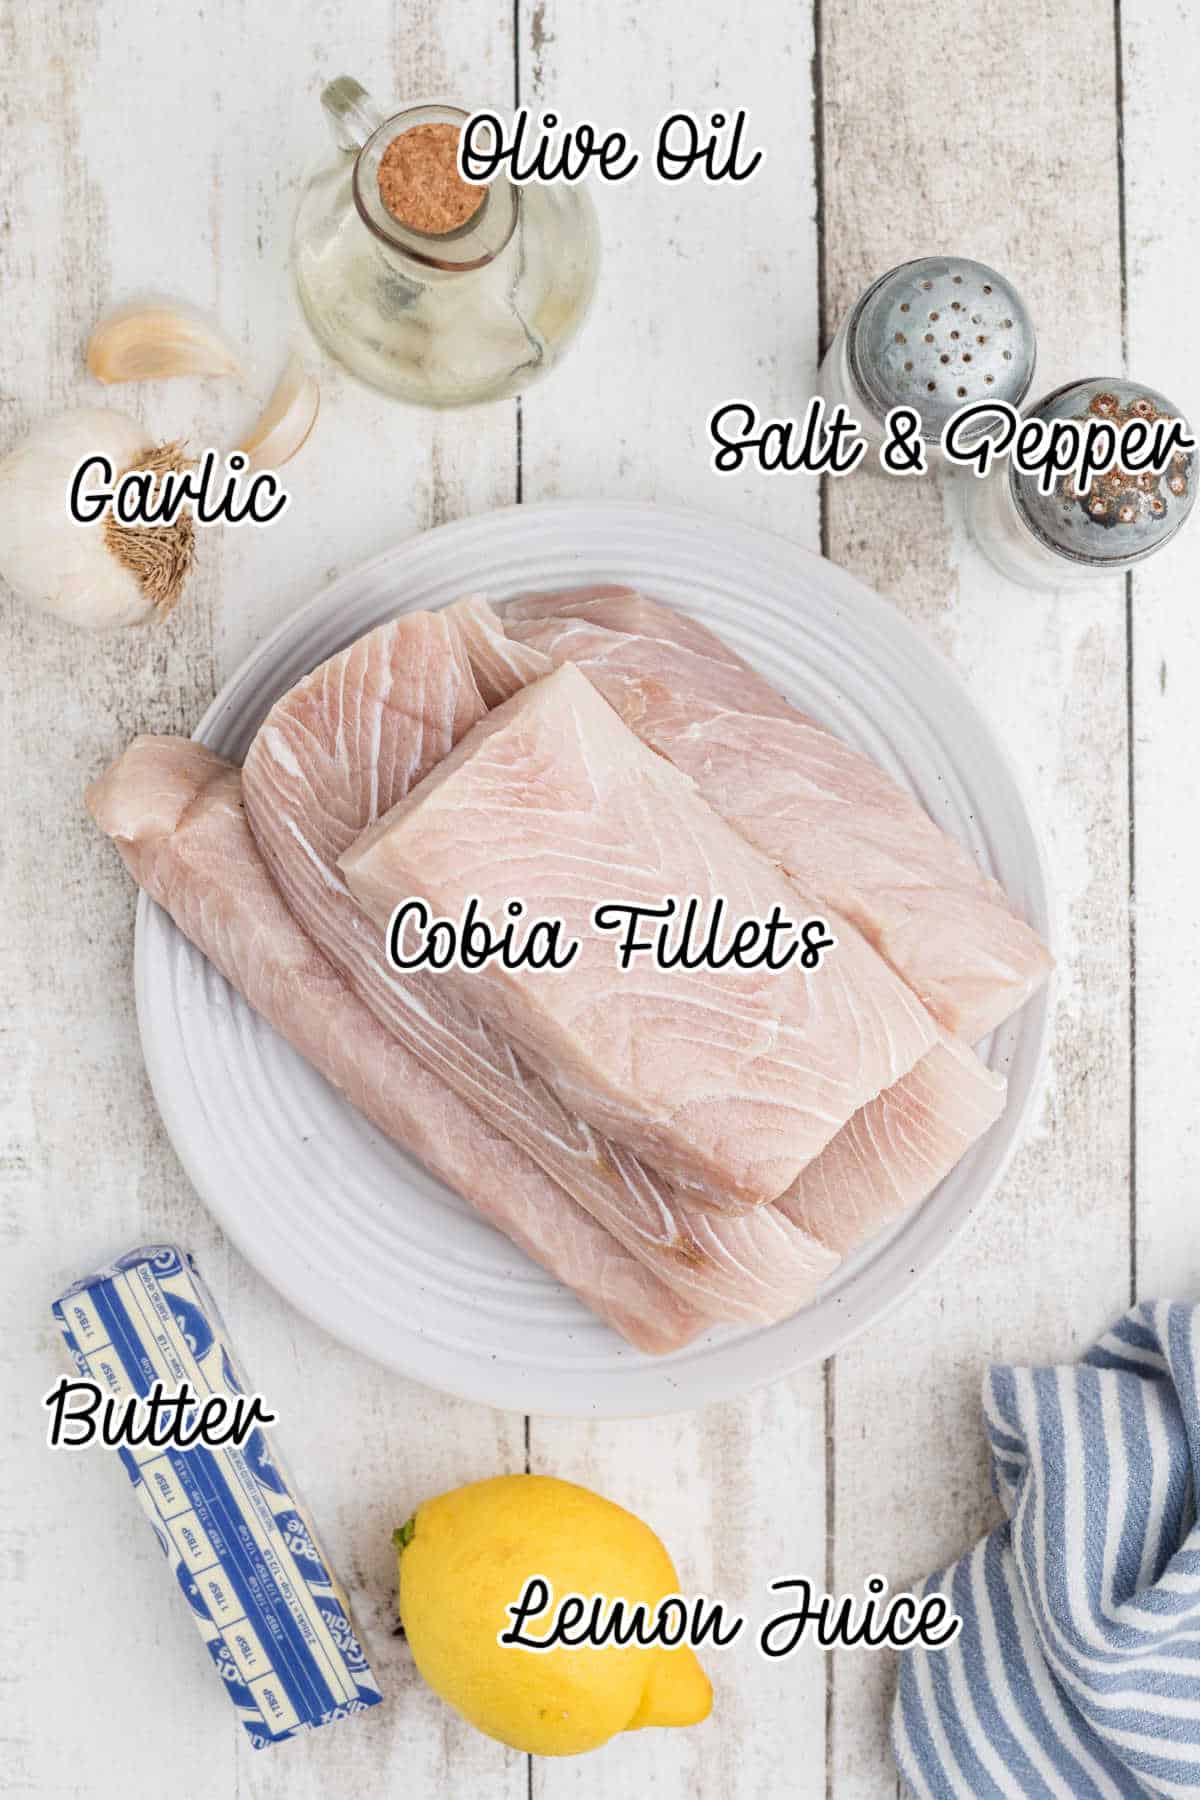 Ingredients needed to make grilled cobia.